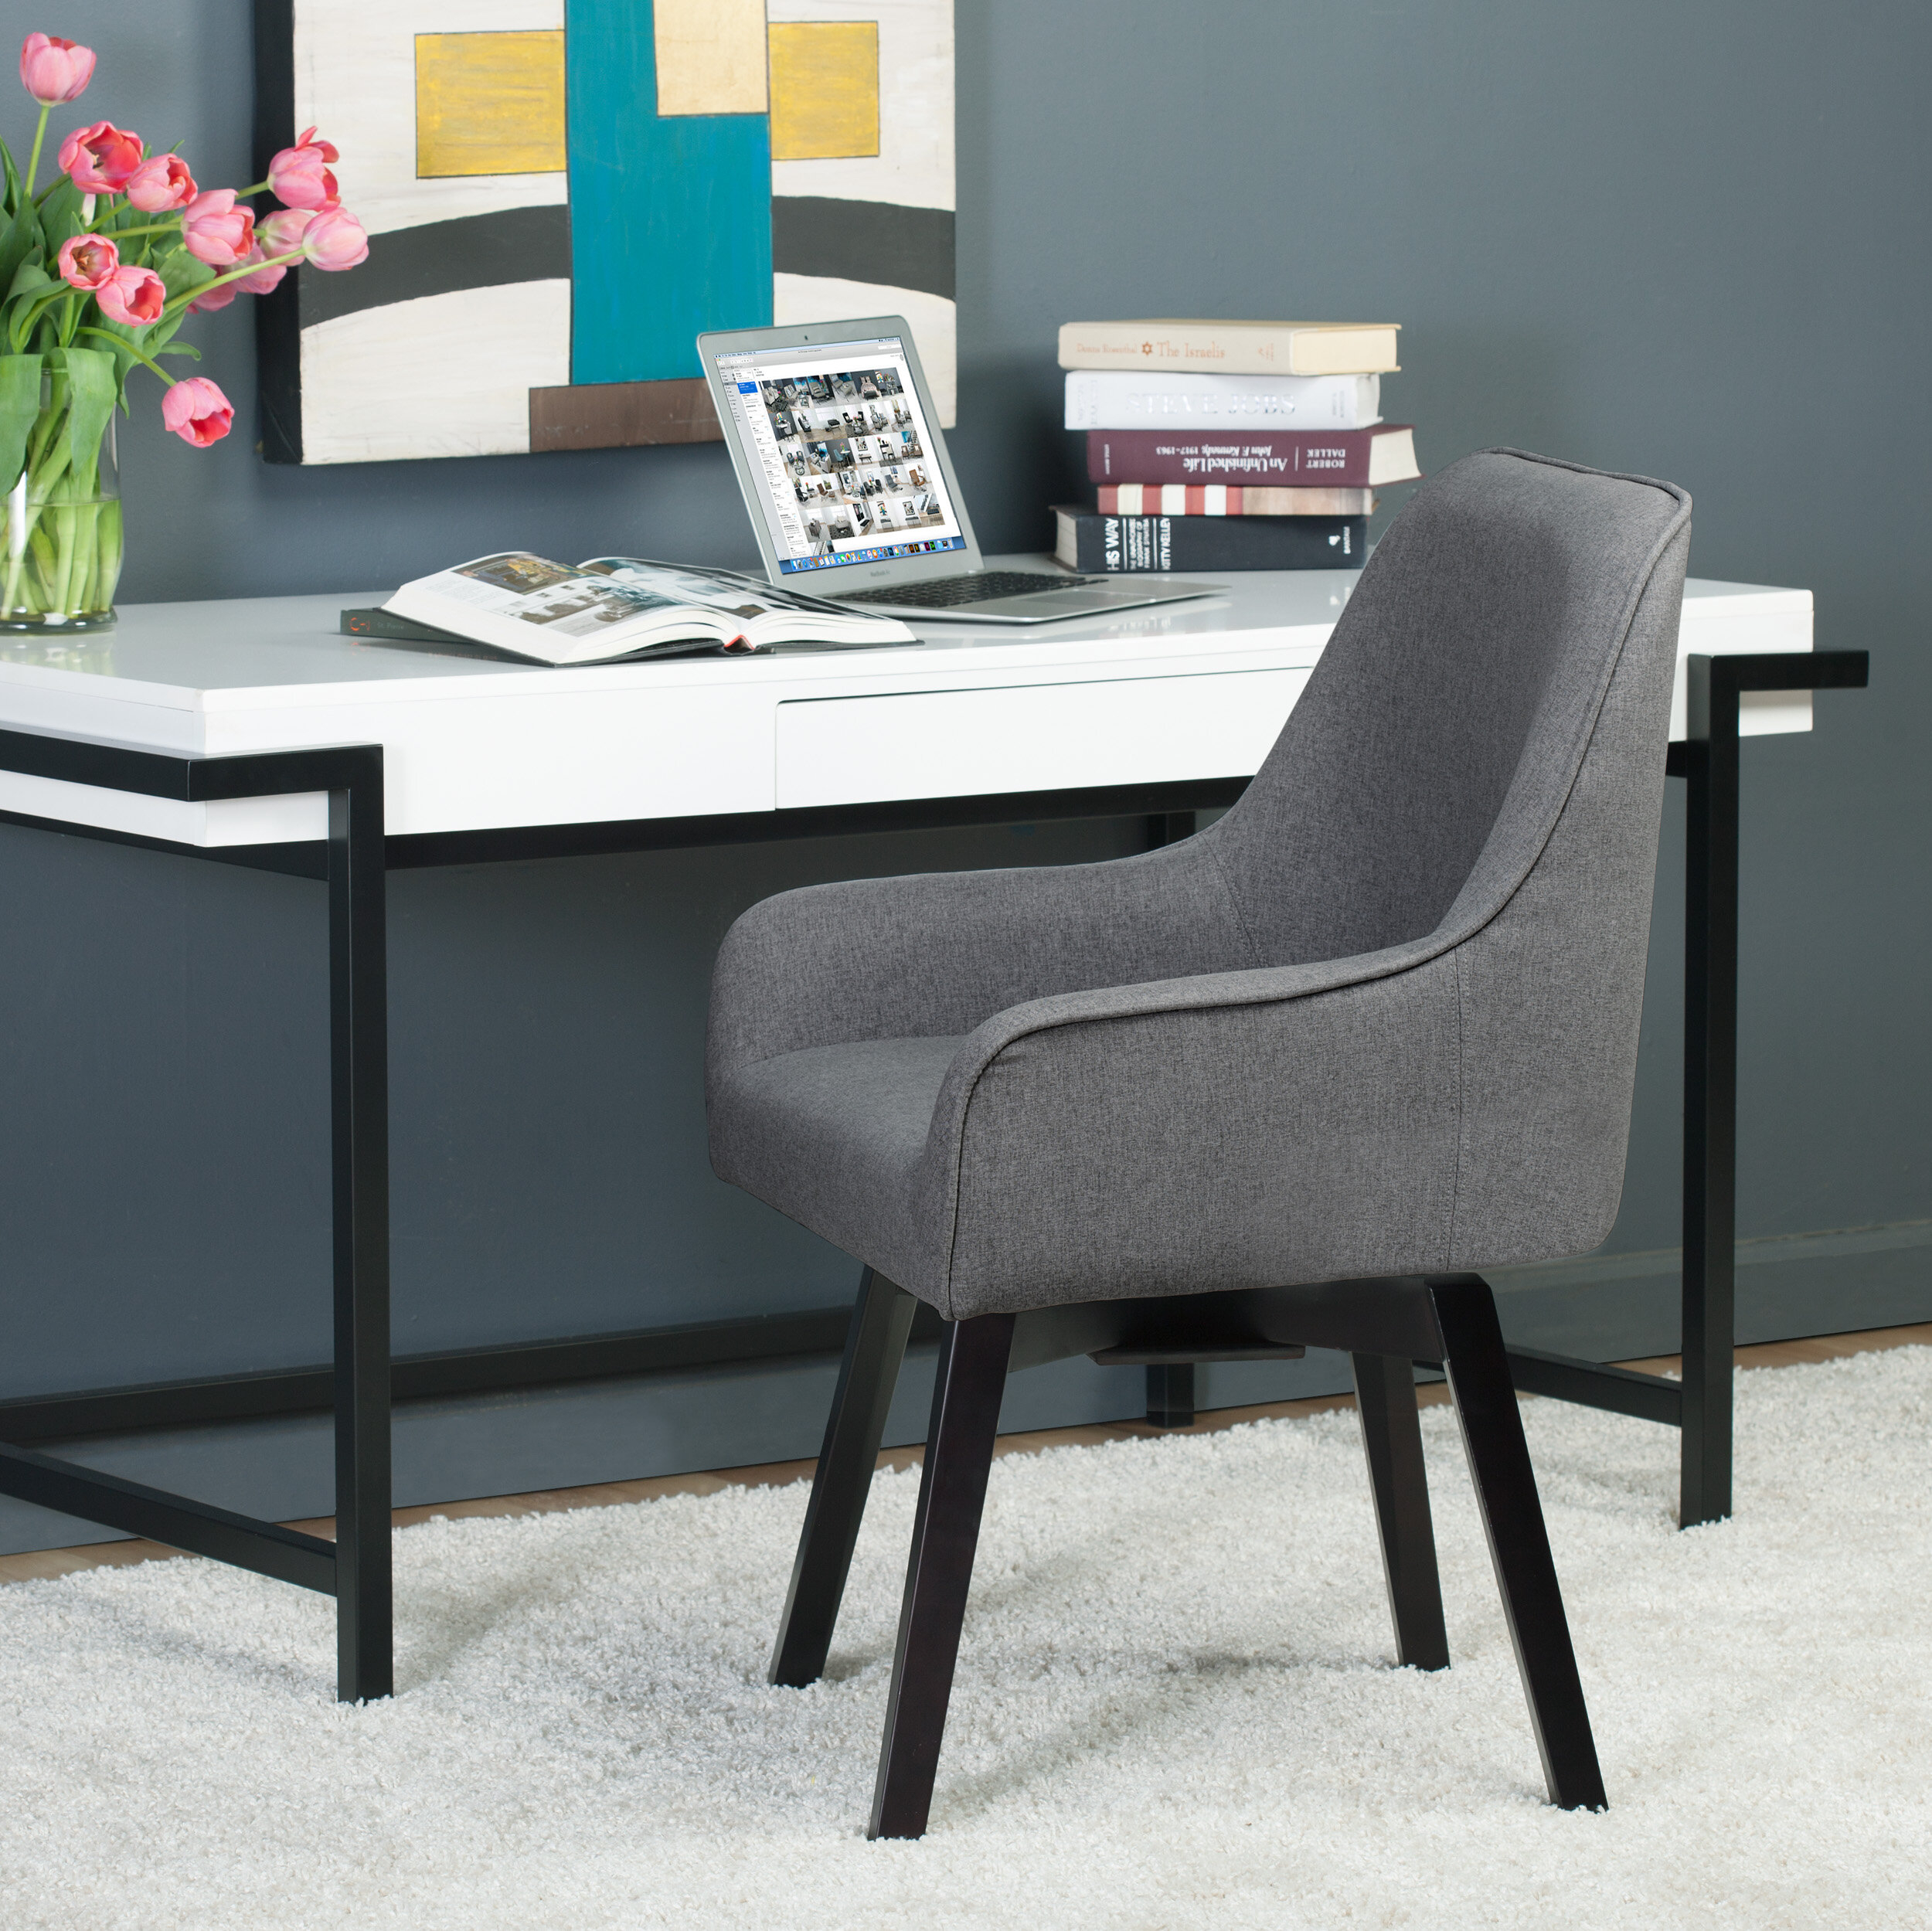 A Desk Chair Without Wheels, Fabric Desk Chair Without Wheels